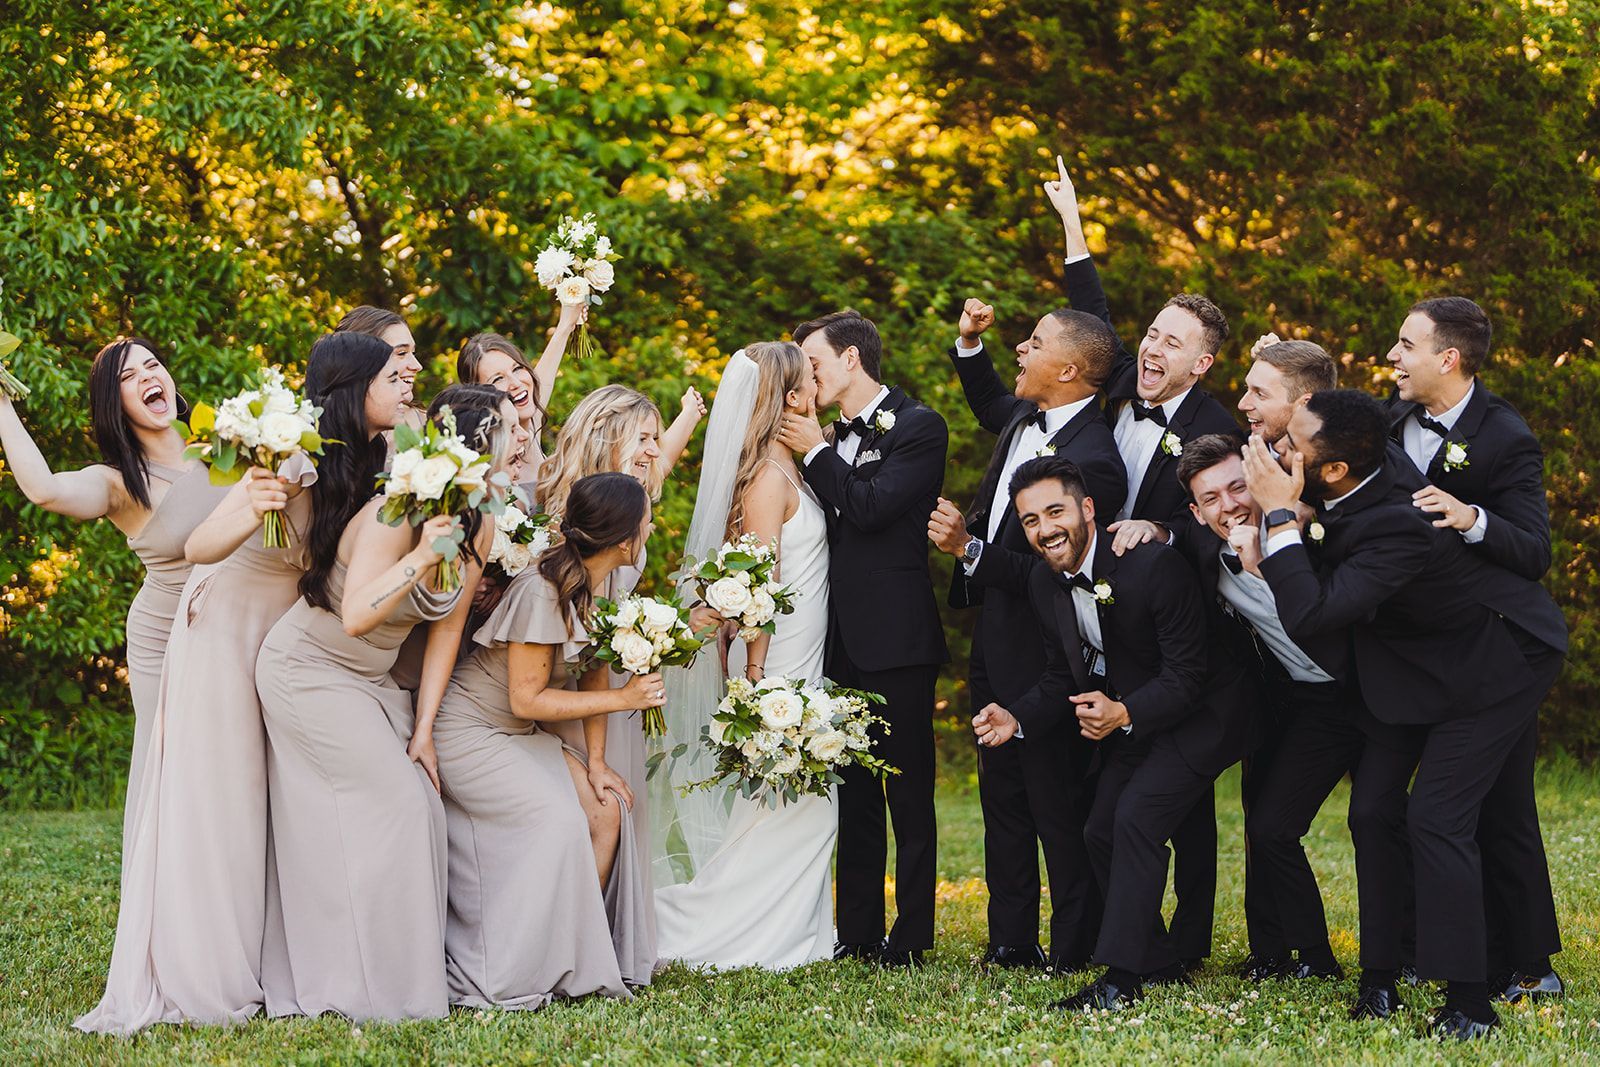 A bride and groom are posing for a picture with their wedding party.